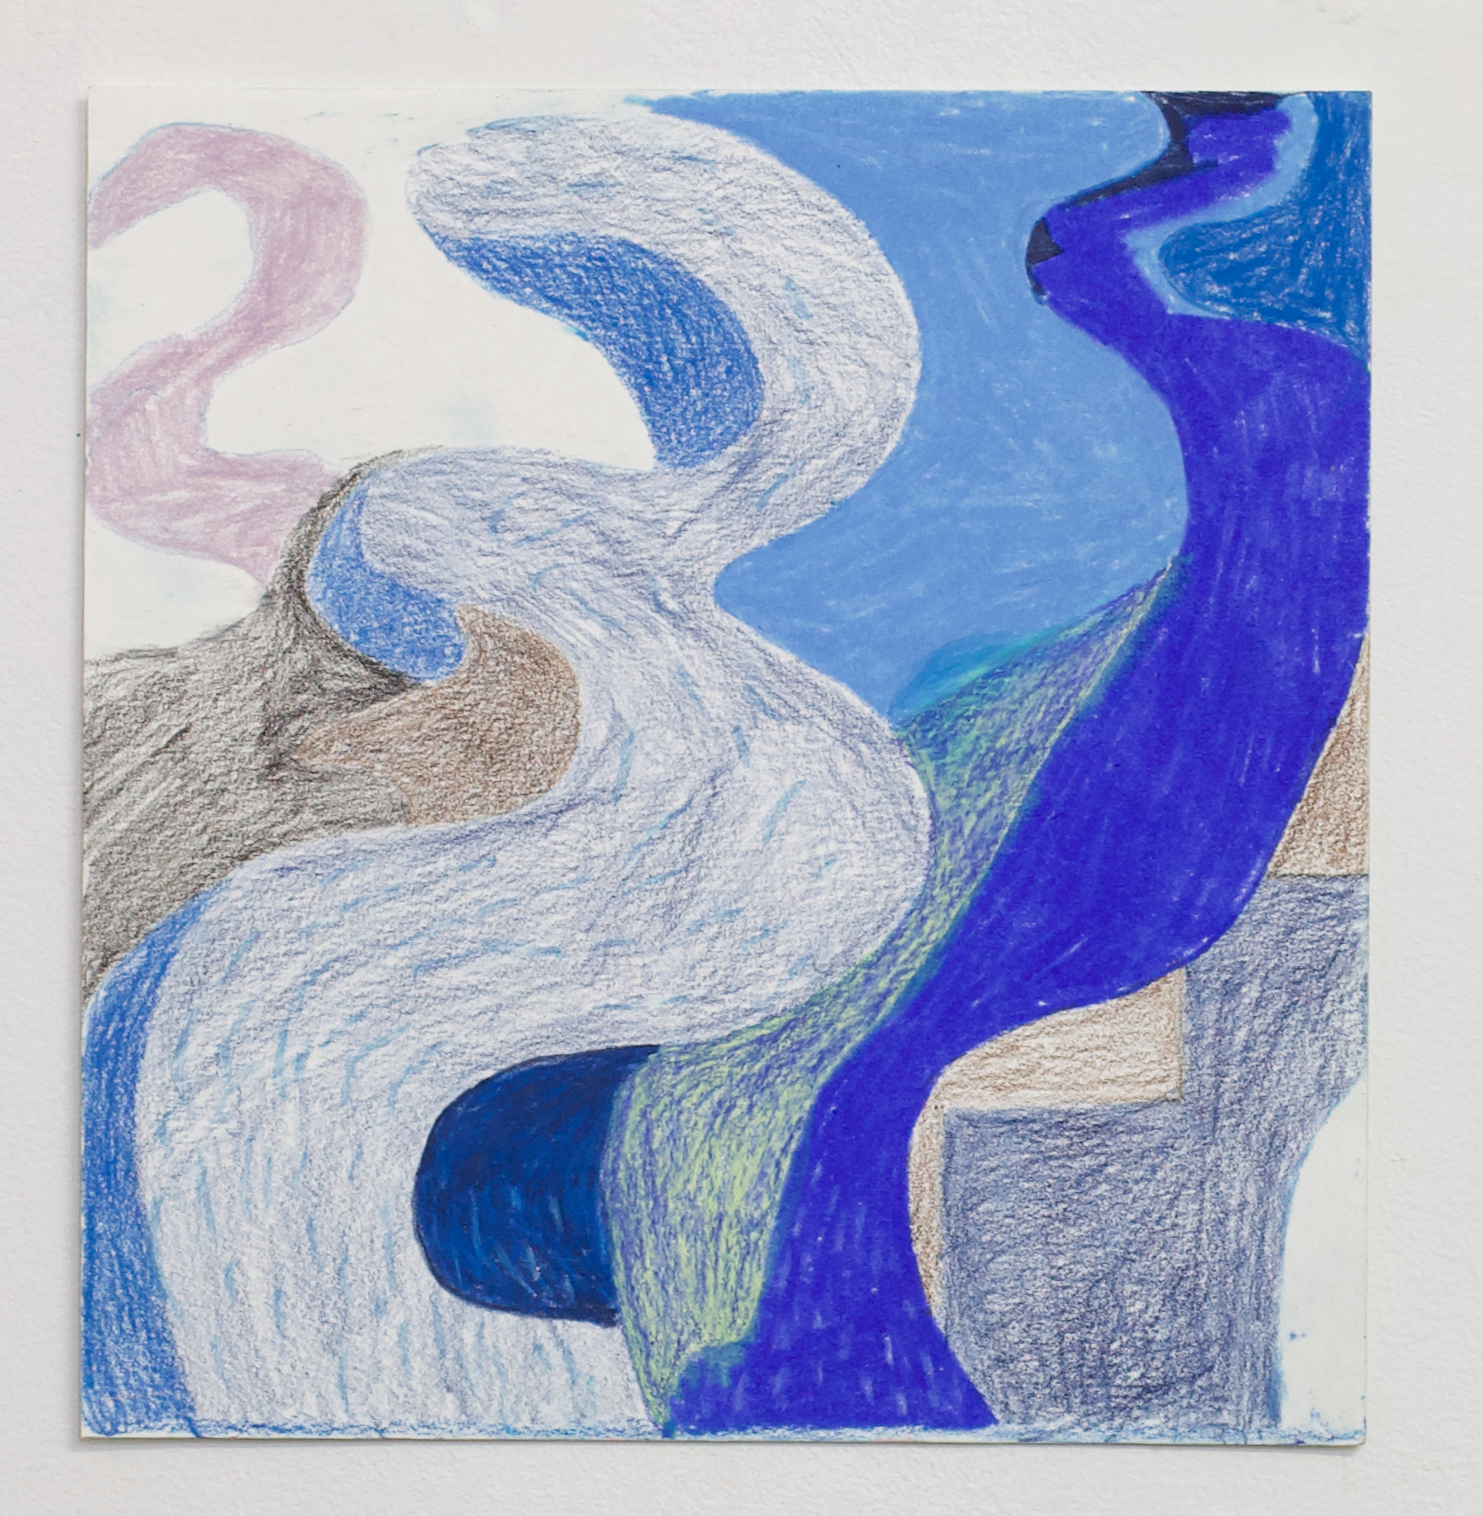   Blue Smoke  2019 colored pencil on paper 6 x 5.5 inches 